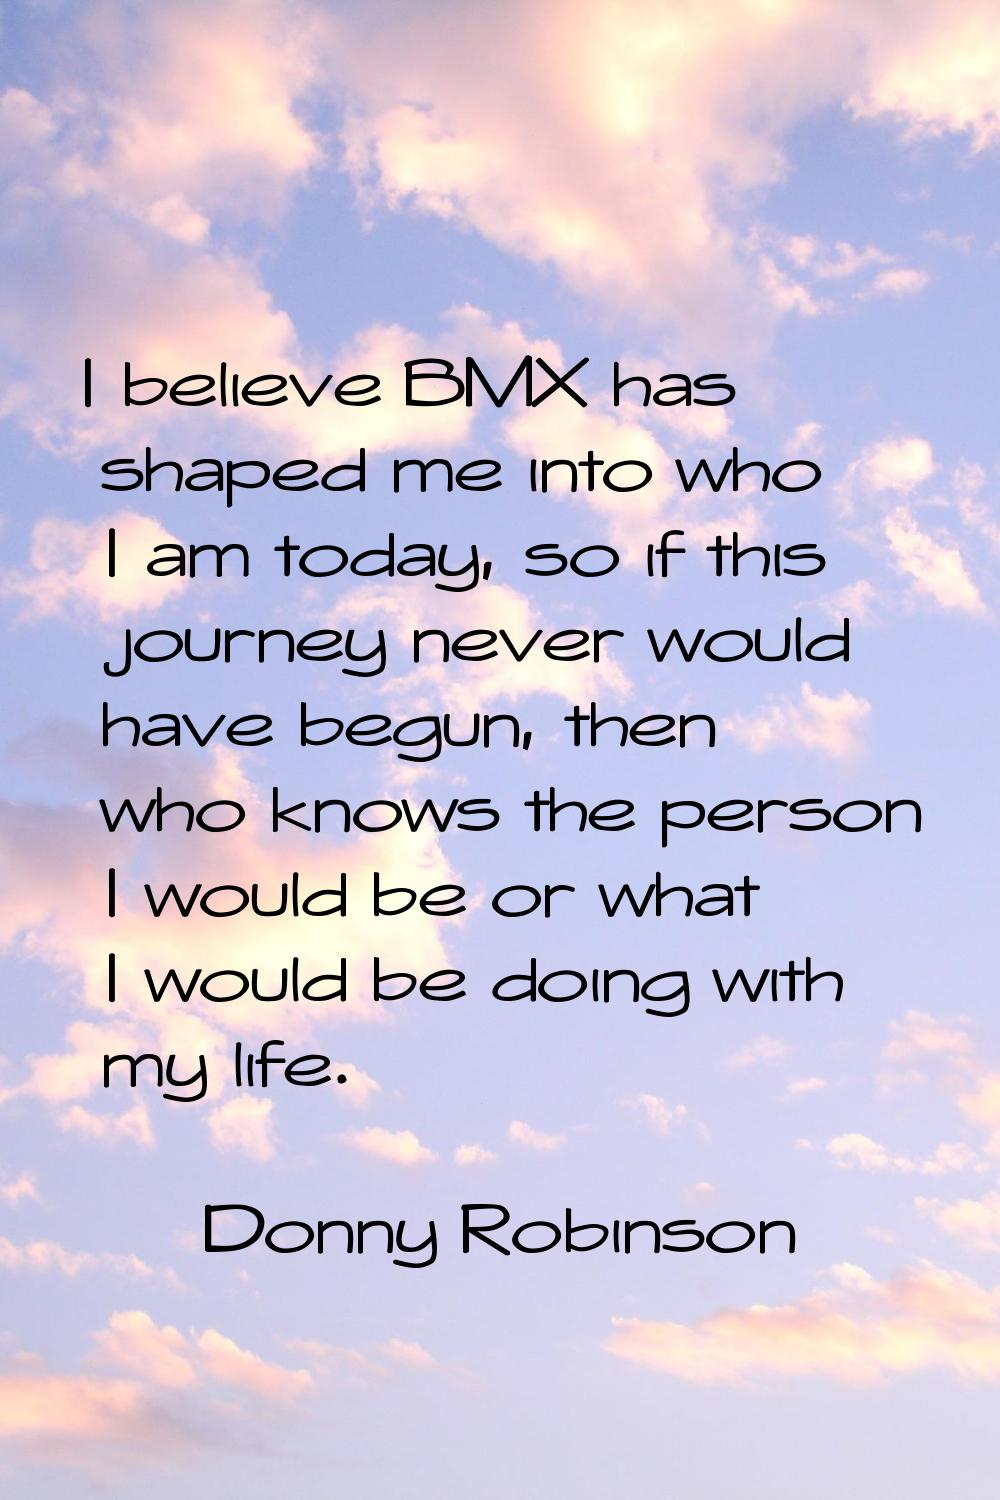 I believe BMX has shaped me into who I am today, so if this journey never would have begun, then wh